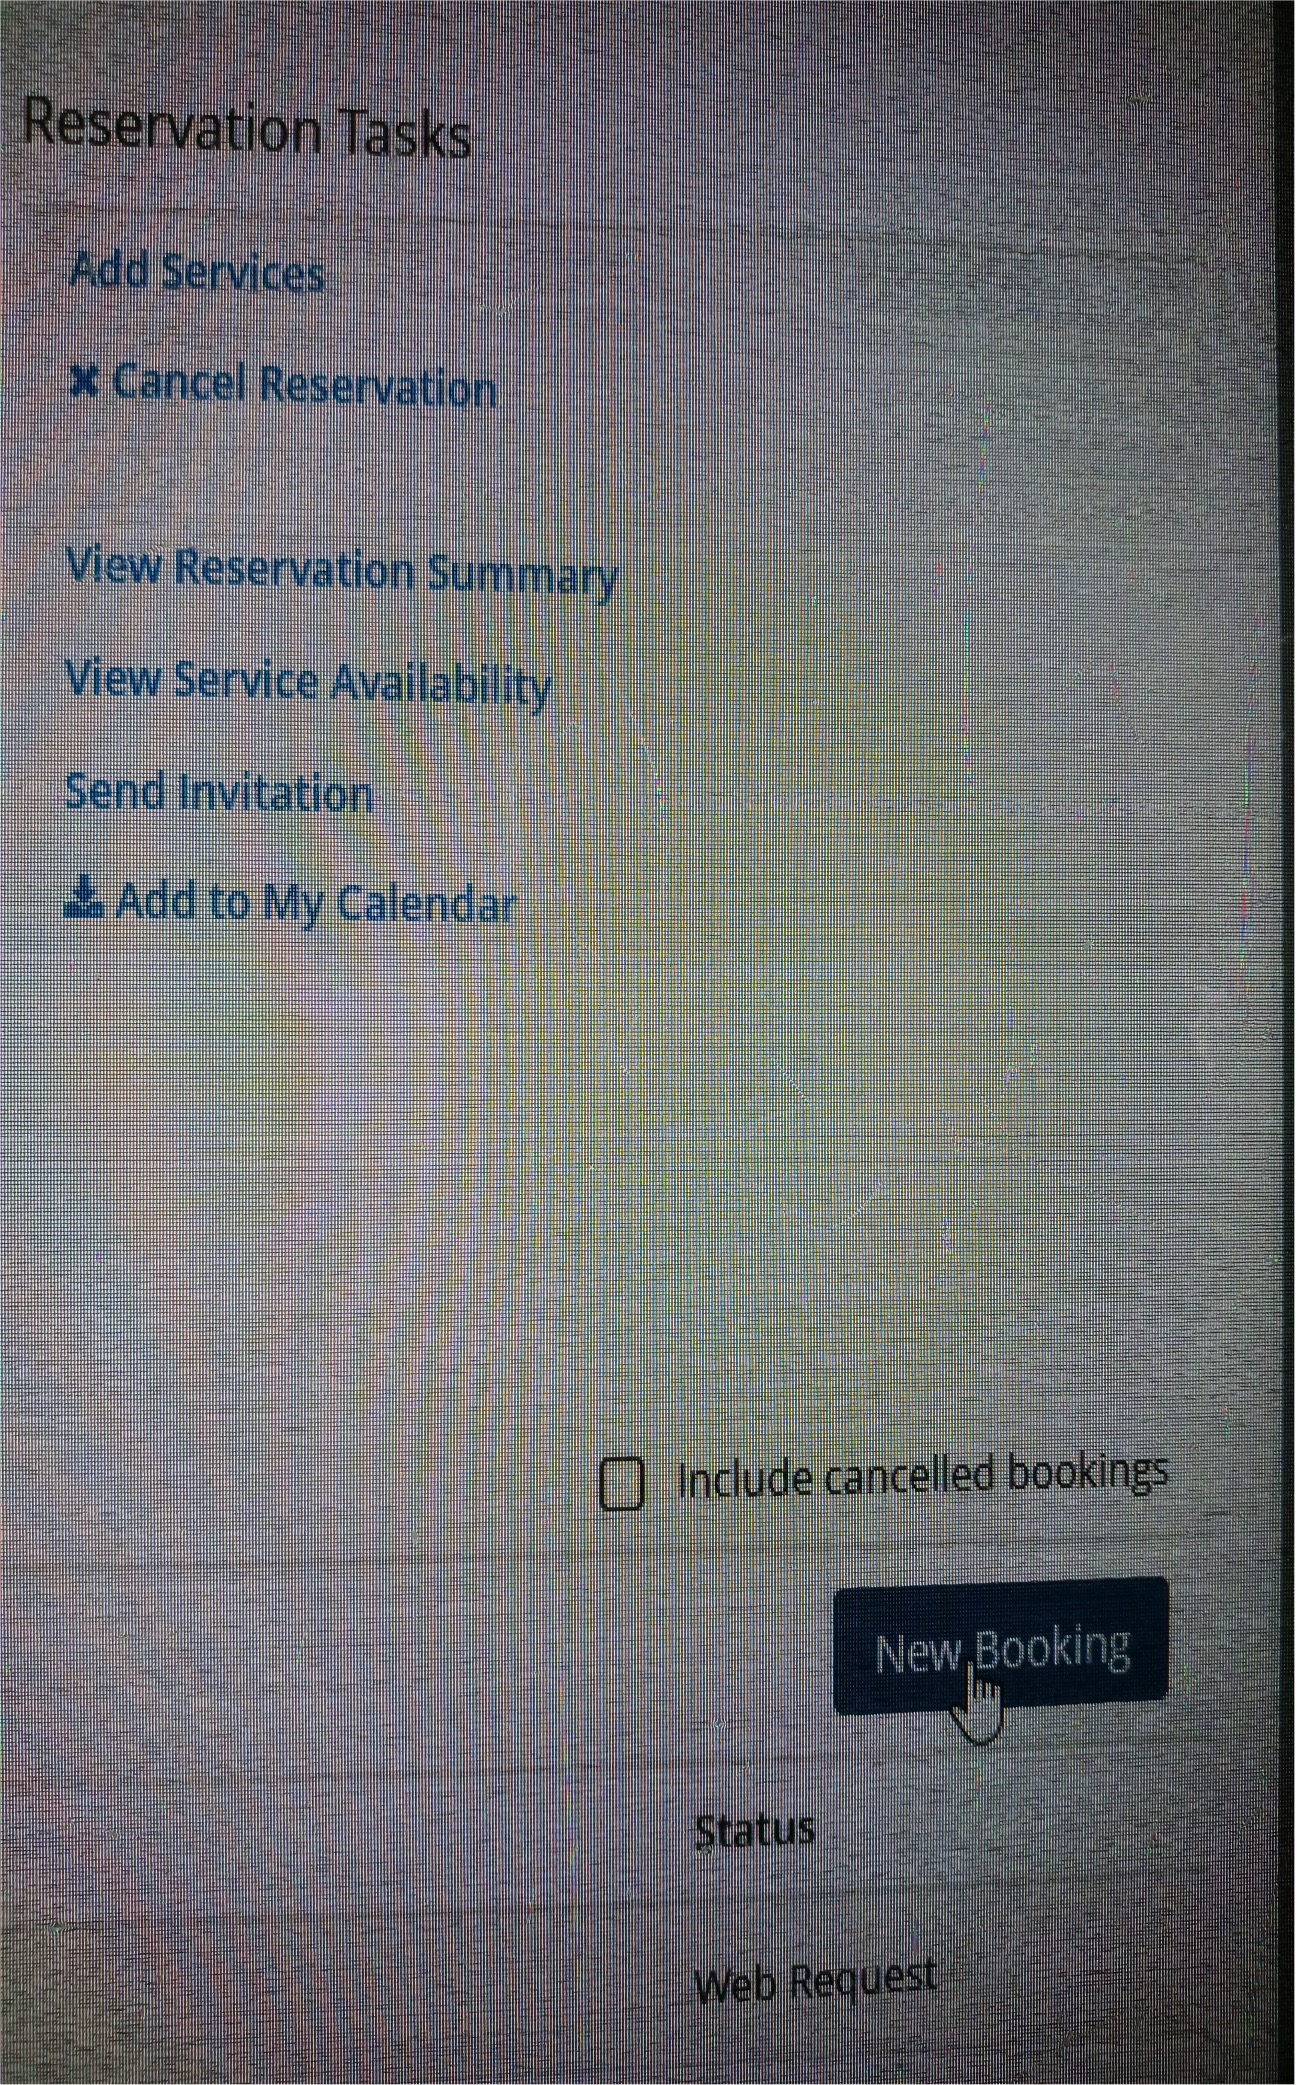 Select New booking